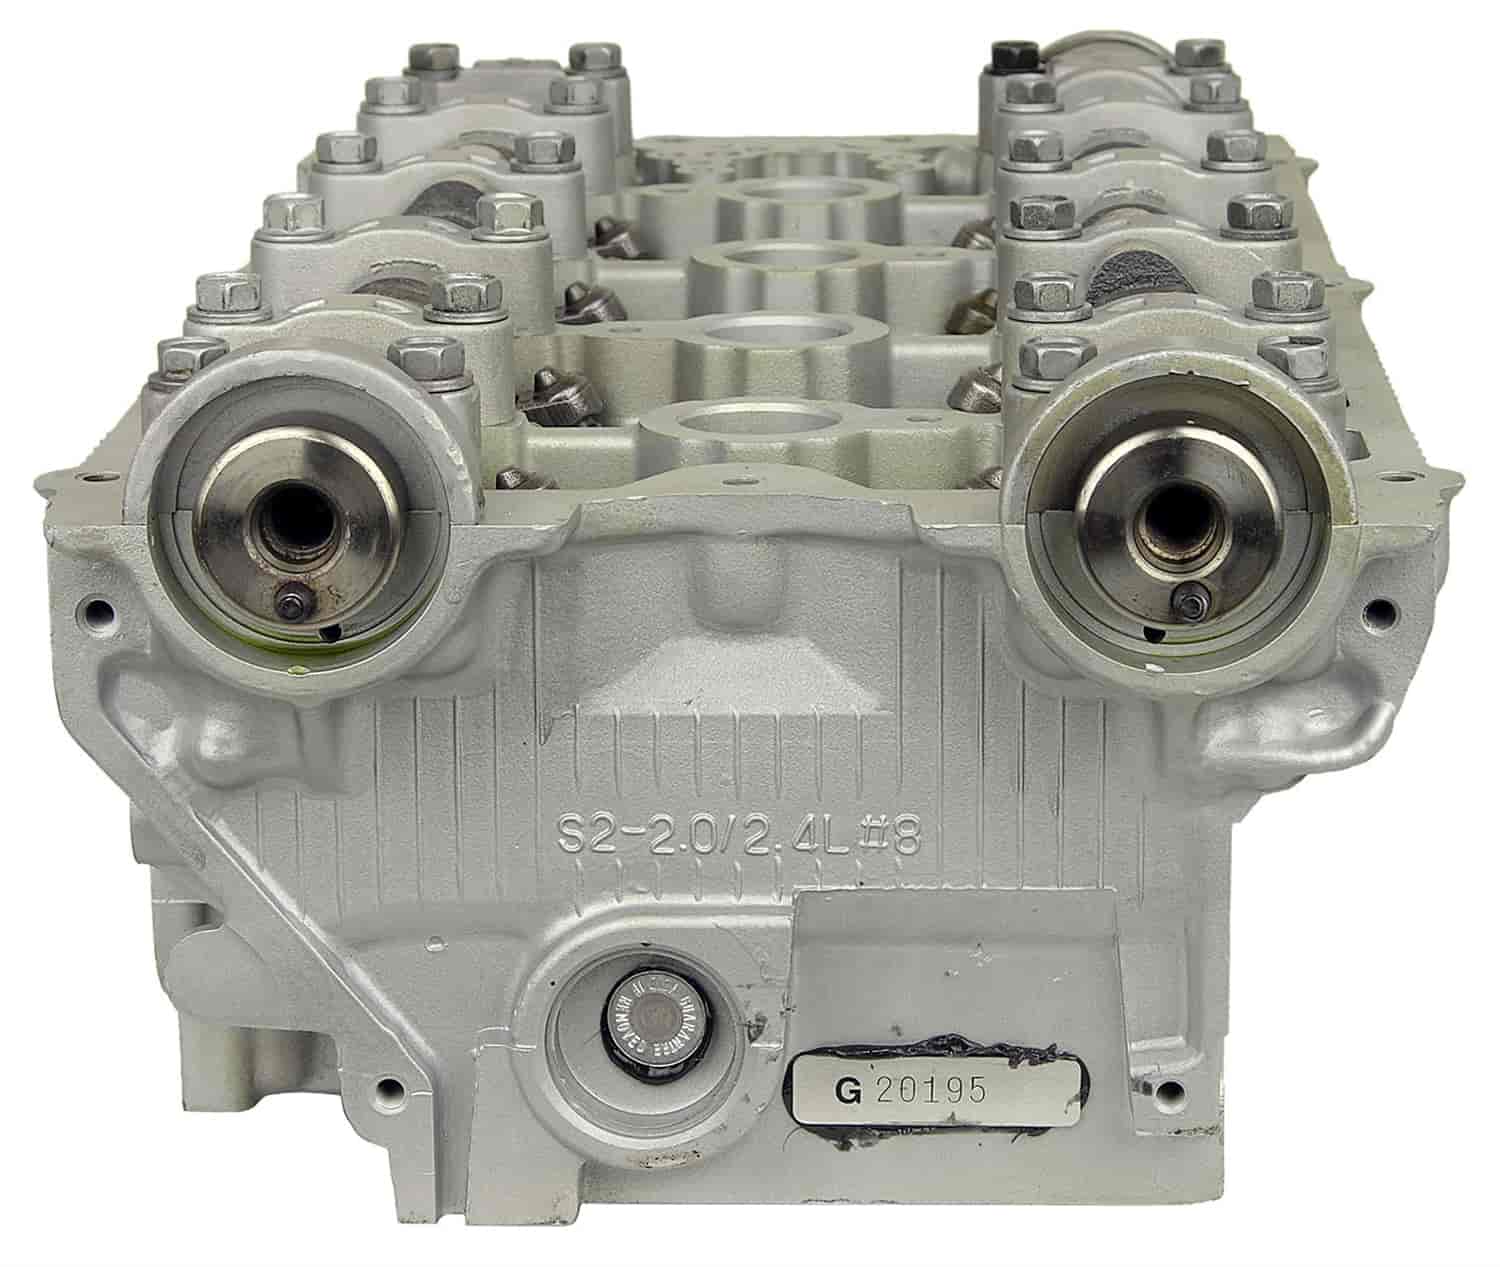 Remanufactured Cylinder Head for 1999-2006 Hyundai/Kia with 2.4L